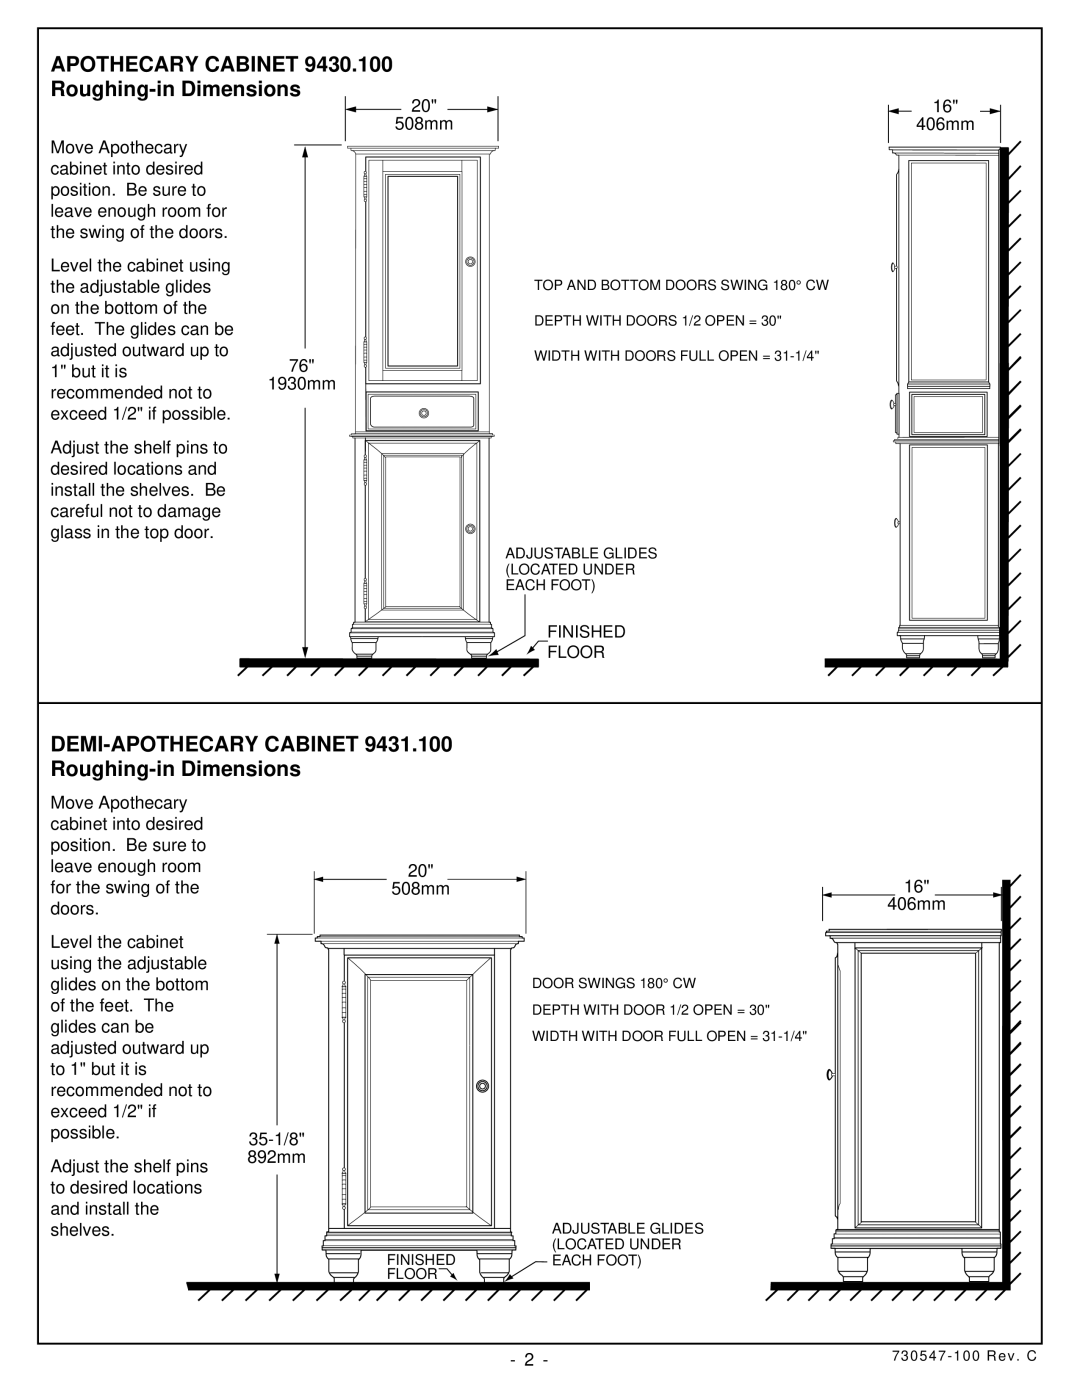 American Standard 9431.100, 9486.101, 9430.100 installation instructions DEMI-APOTHECARY CABINET Roughing-in Dimensions 